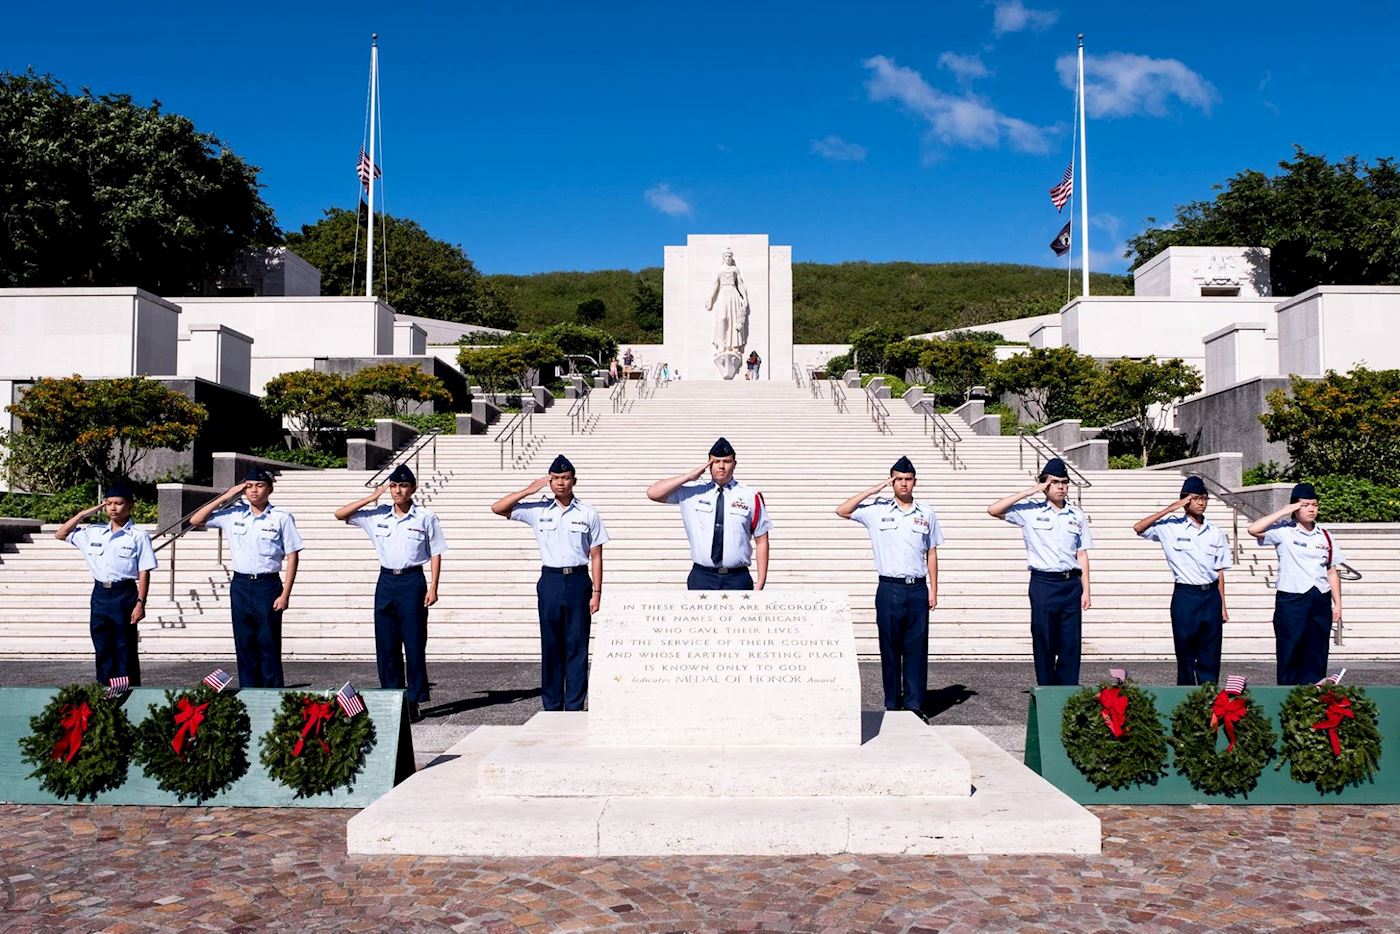 Maryknoll Cadet Squadron Civil Air Patrol cadets honored veterans laid to rest at the National Memorial Cemetery of the Pacific during the 2018 Wreaths Across America ceremony.